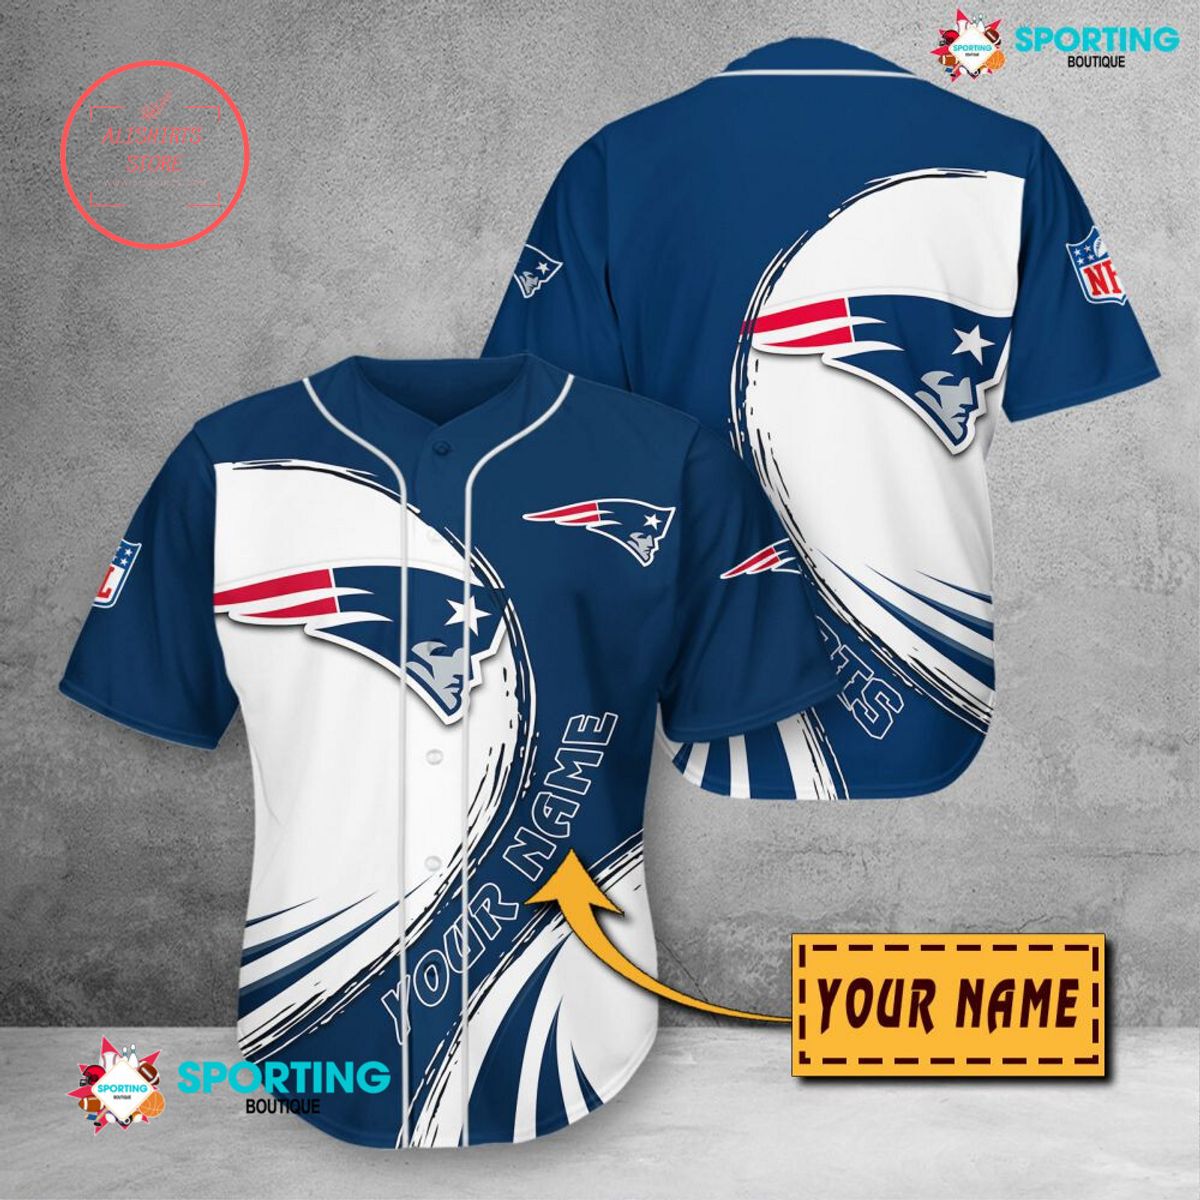 New England Patriots NFL Personalized Baseball Jersey